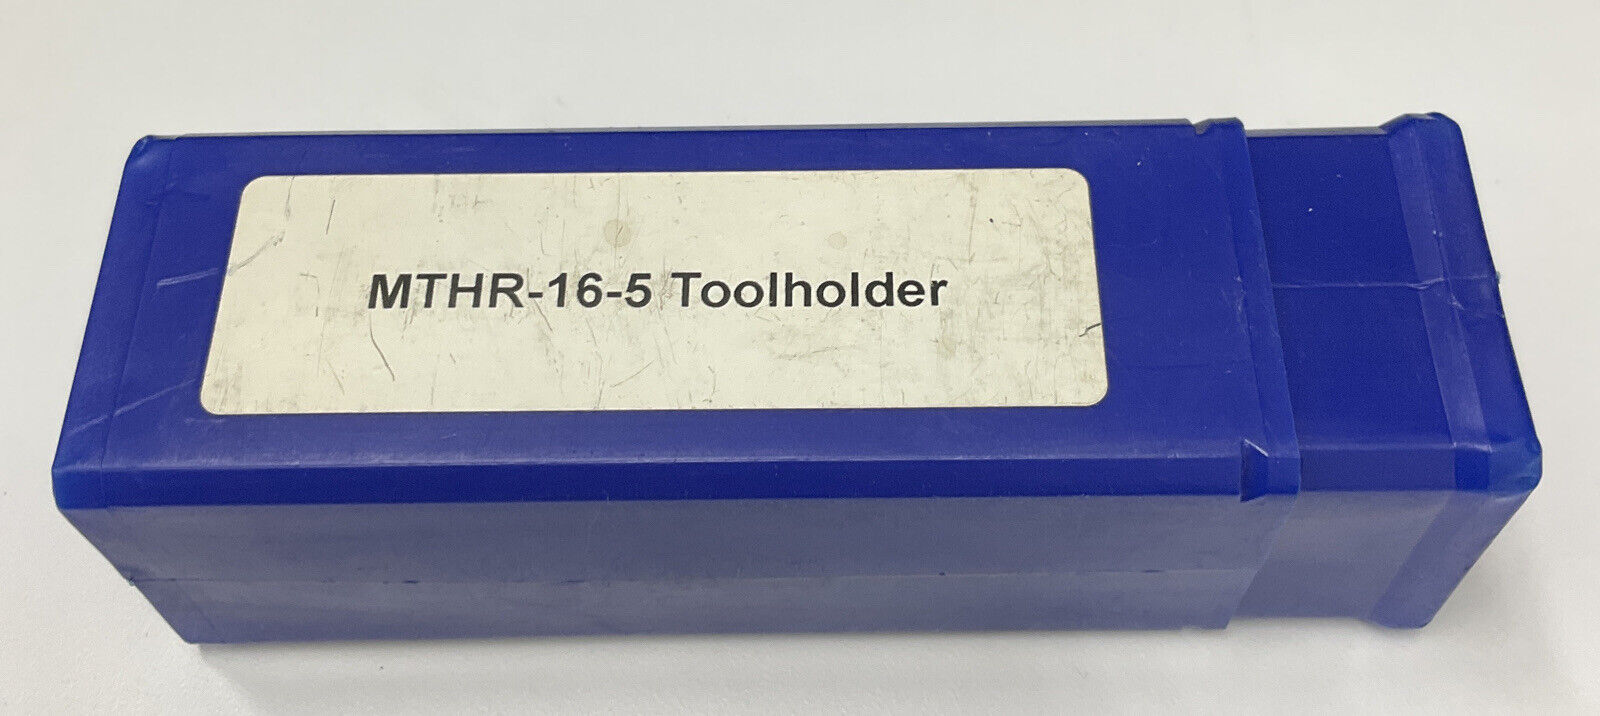 SCTools MTHR-16-5 ToolHolder For CNC & Metal Working (CL297)